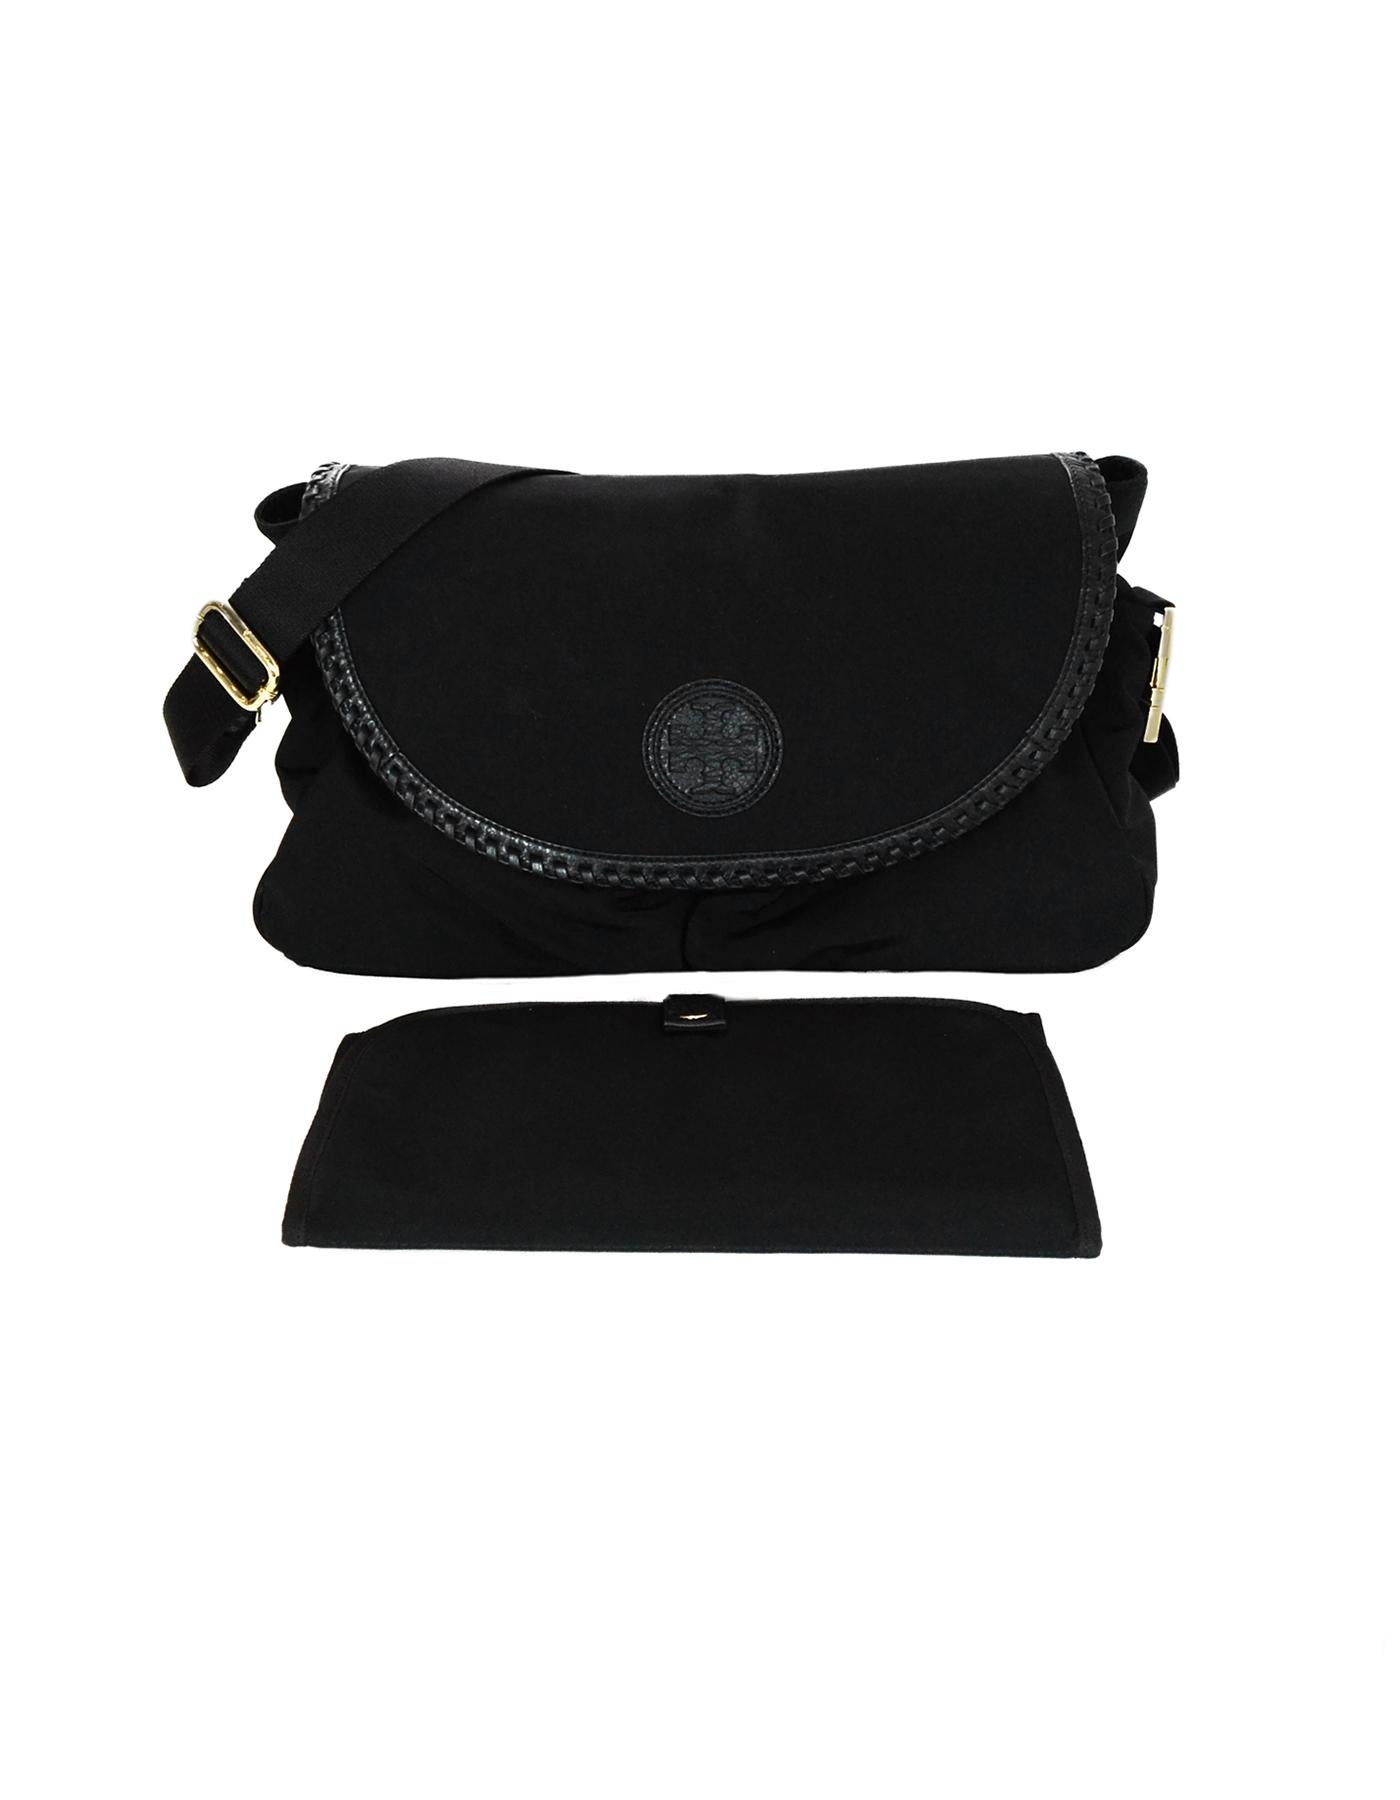 Women's Tory Burch Black Nylon/Leather Whipstitch Trim Marion Diaper Bag W/ Changing Pad